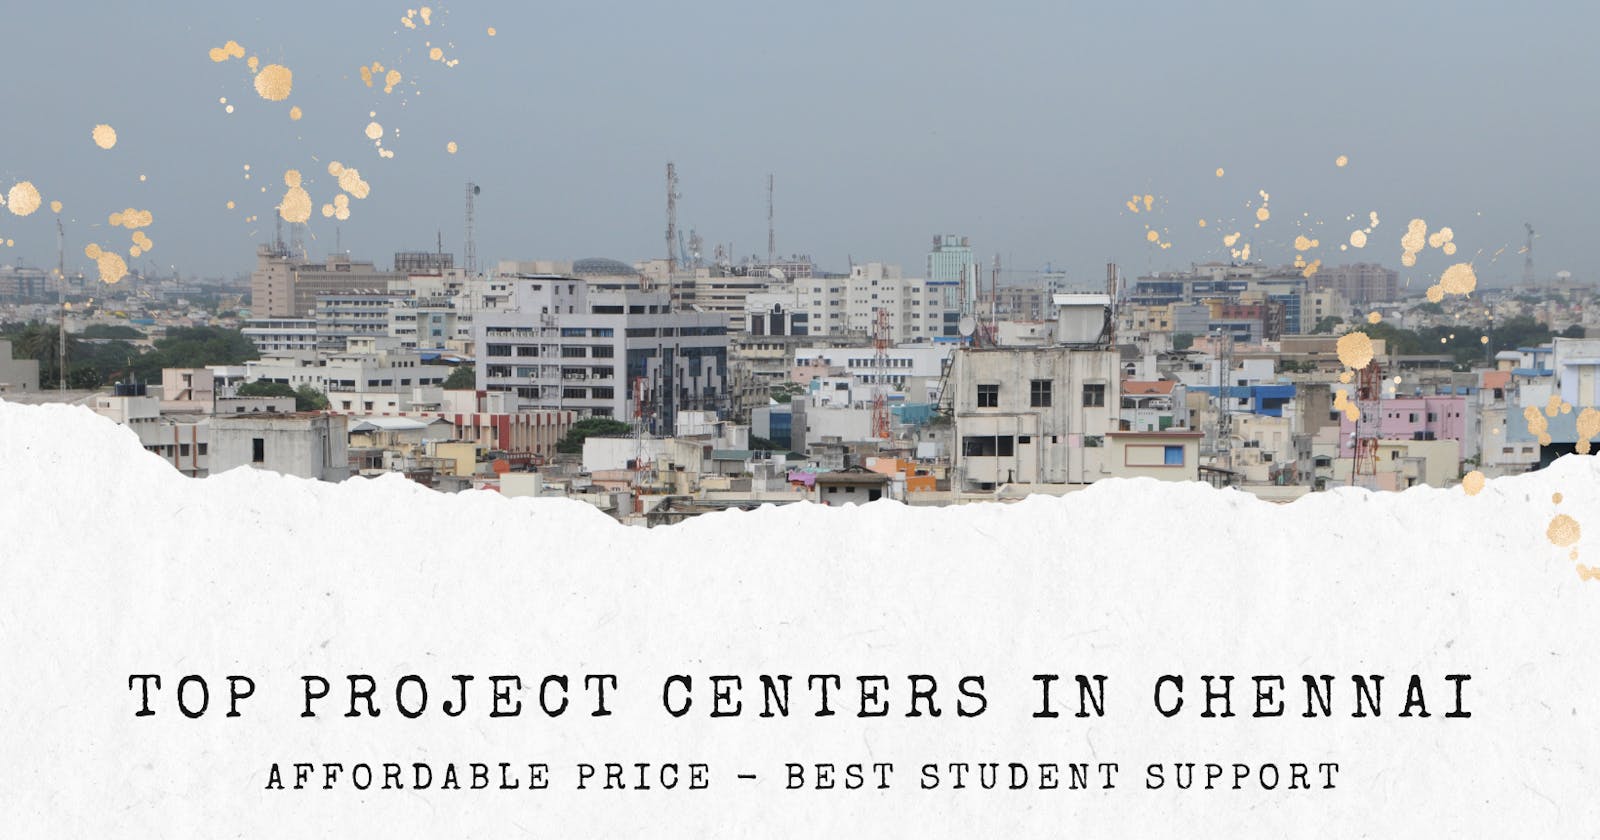 Top Project Centers in Chennai - Affordable Price